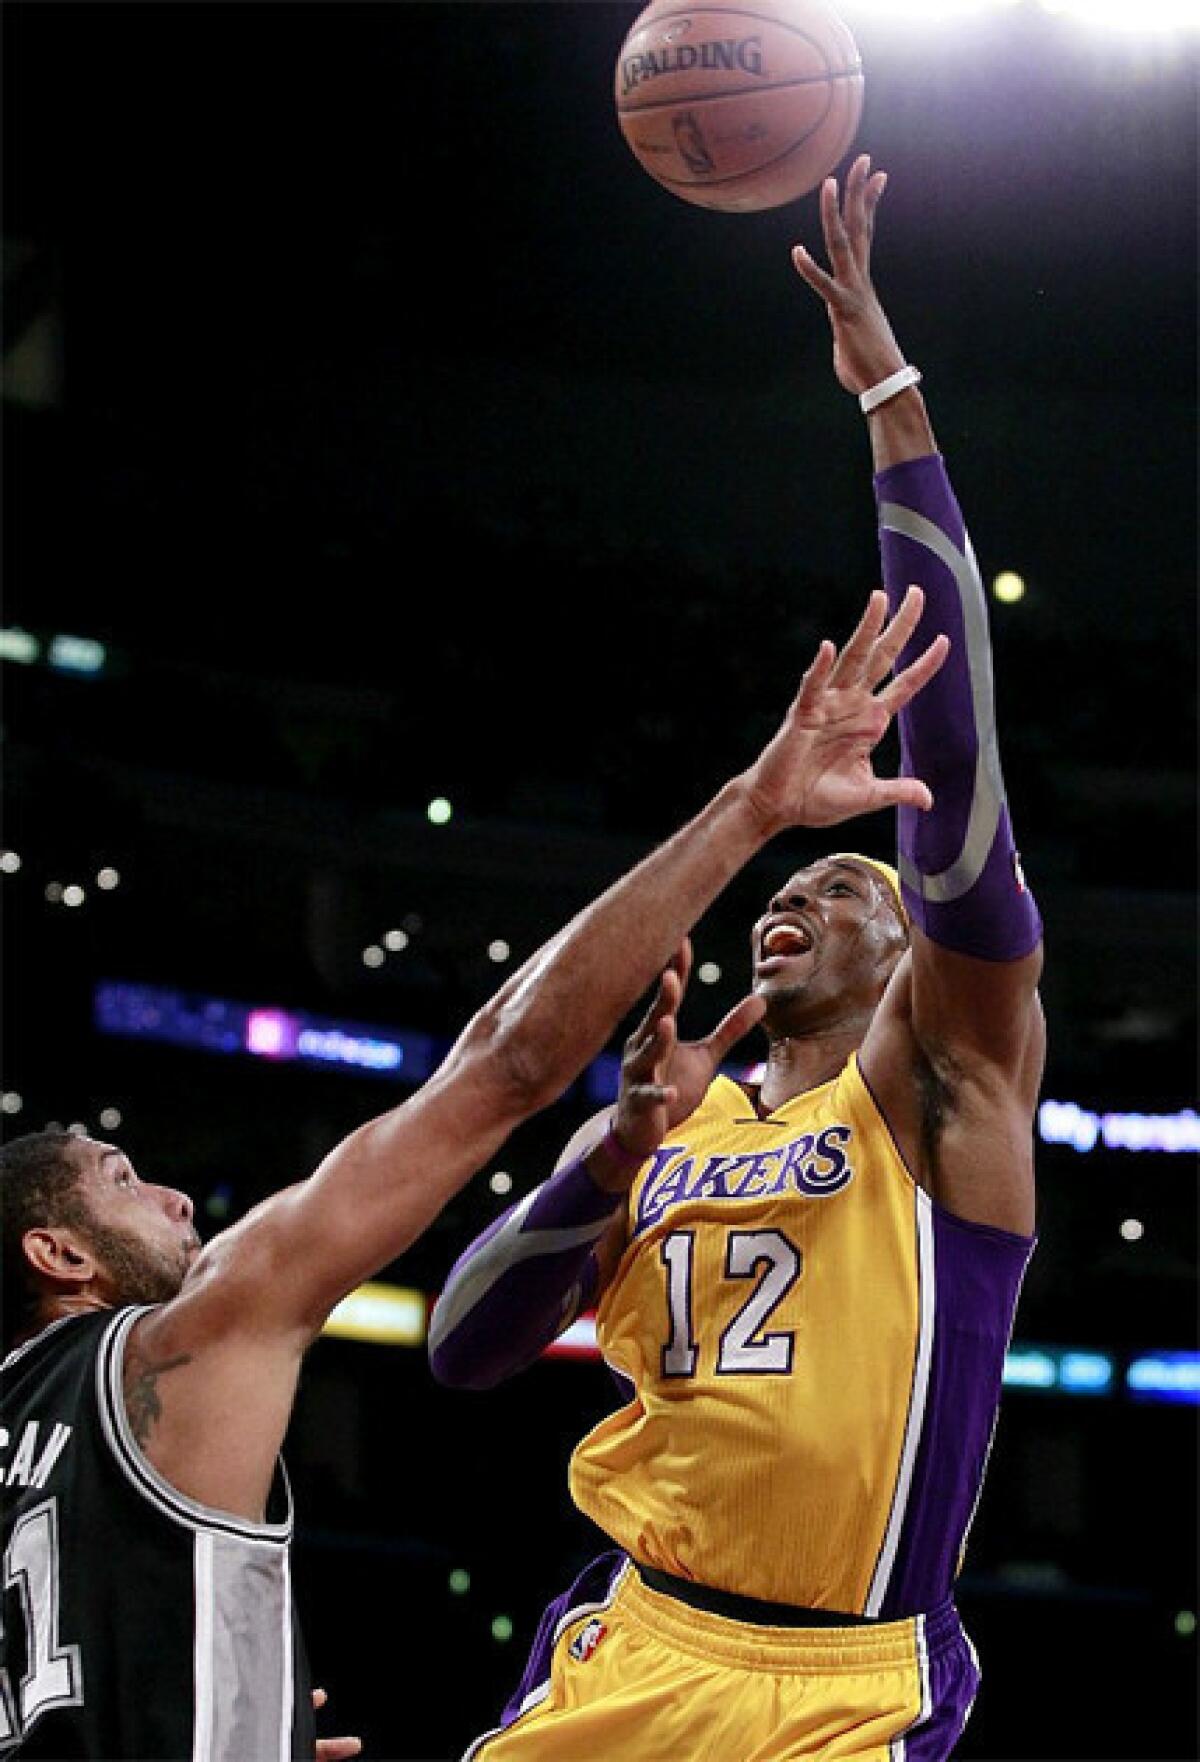 Dwight Howard shoots over Tim Duncan in the Lakers match-up against the Spurs.